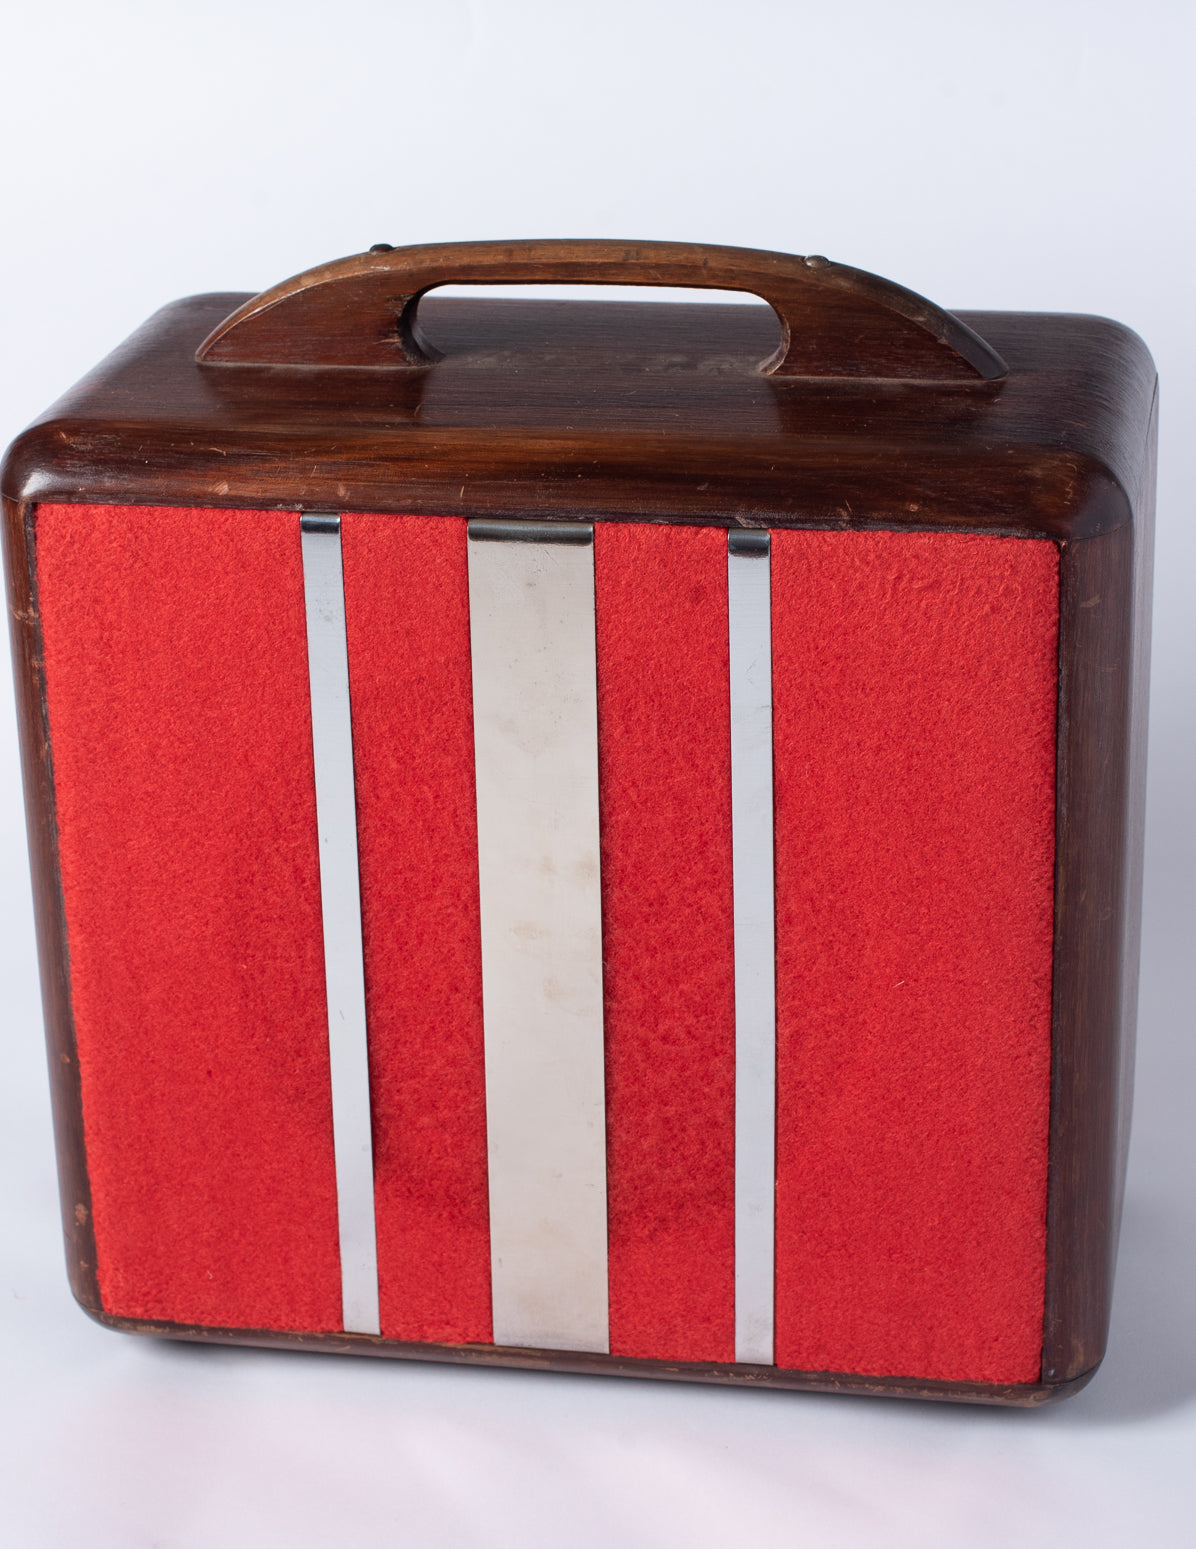 1946 Fender Model 26 Woody Amp chrome strips and red grill cloth